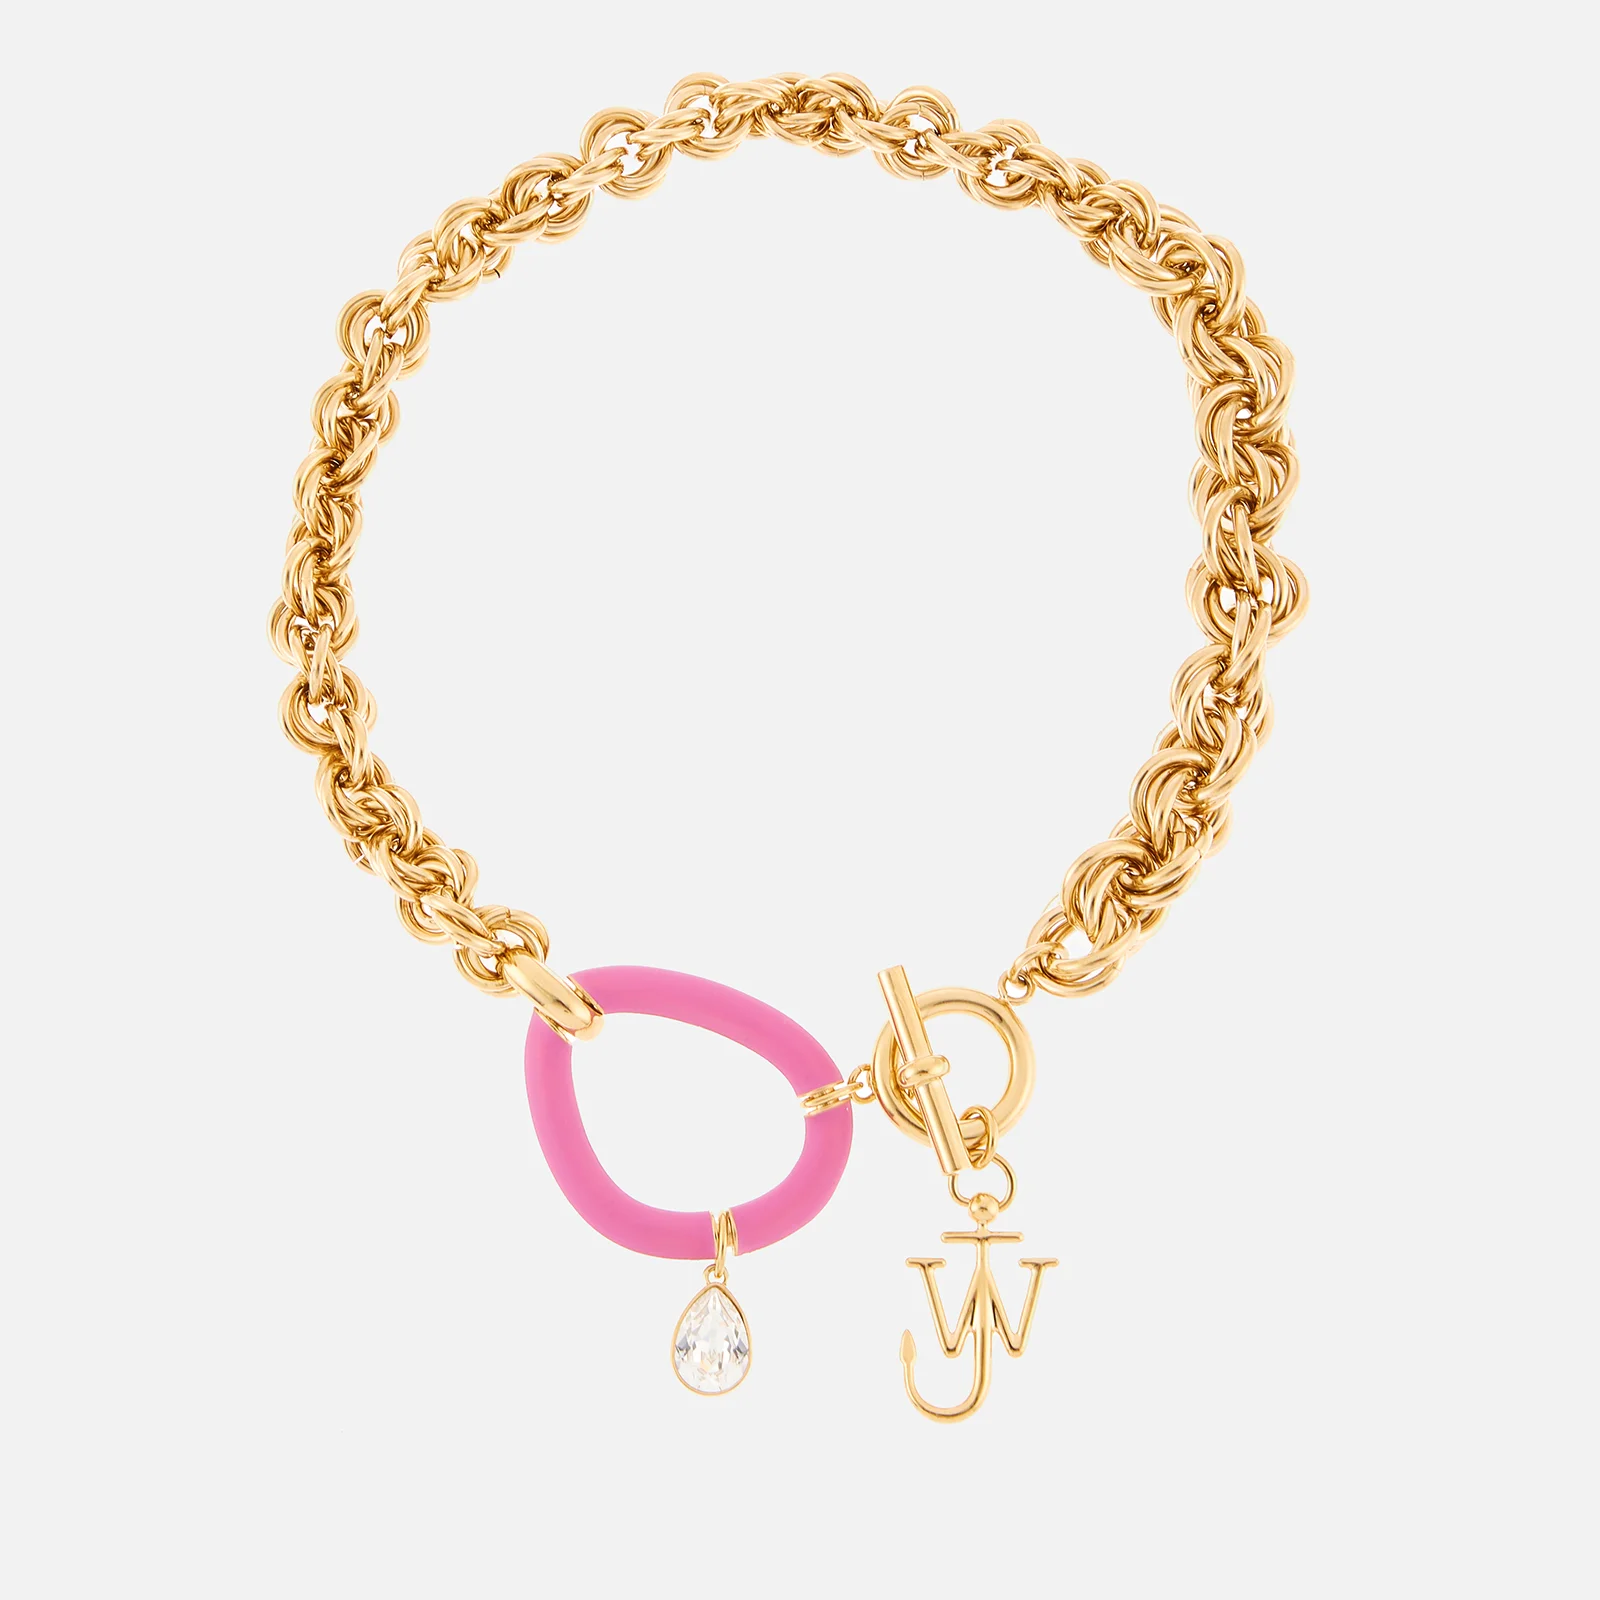 JW Anderson Women's Oversized Link Chain Choker - Gold/Pink Image 1